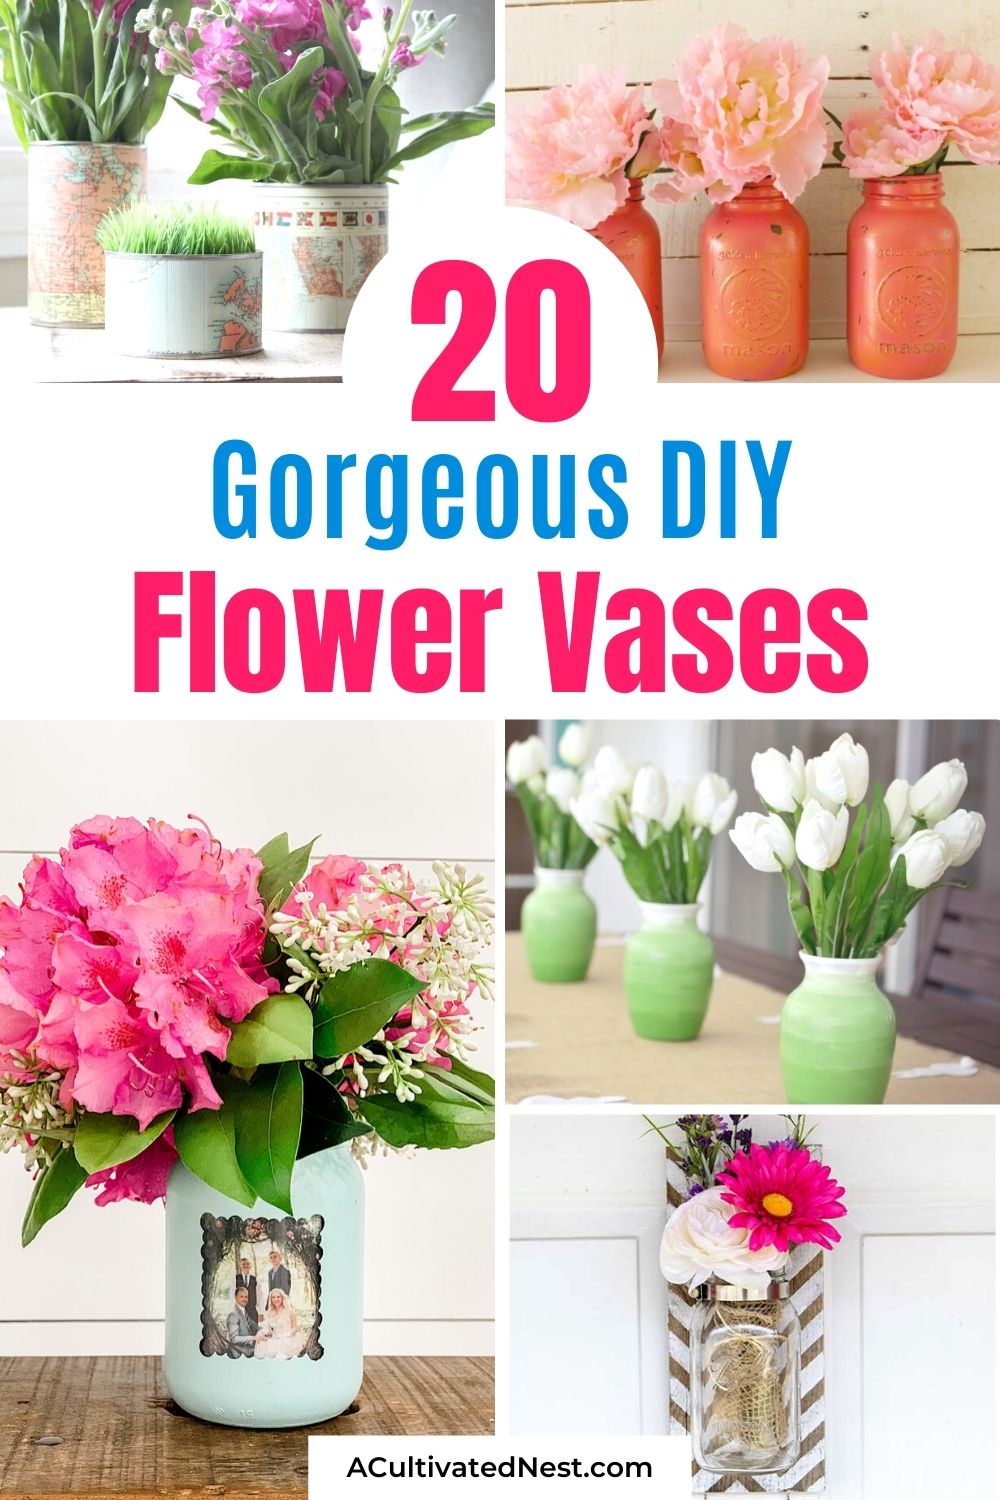 20 Gorgeous DIY Flower Vase Ideas- If you want to brighten up your home or office space, then you'll love these gorgeous DIY flower vase ideas! They also make wonderful homemade gifts! | #diyProjects #flowerVase #crafts #DIY #ACultivatedNest